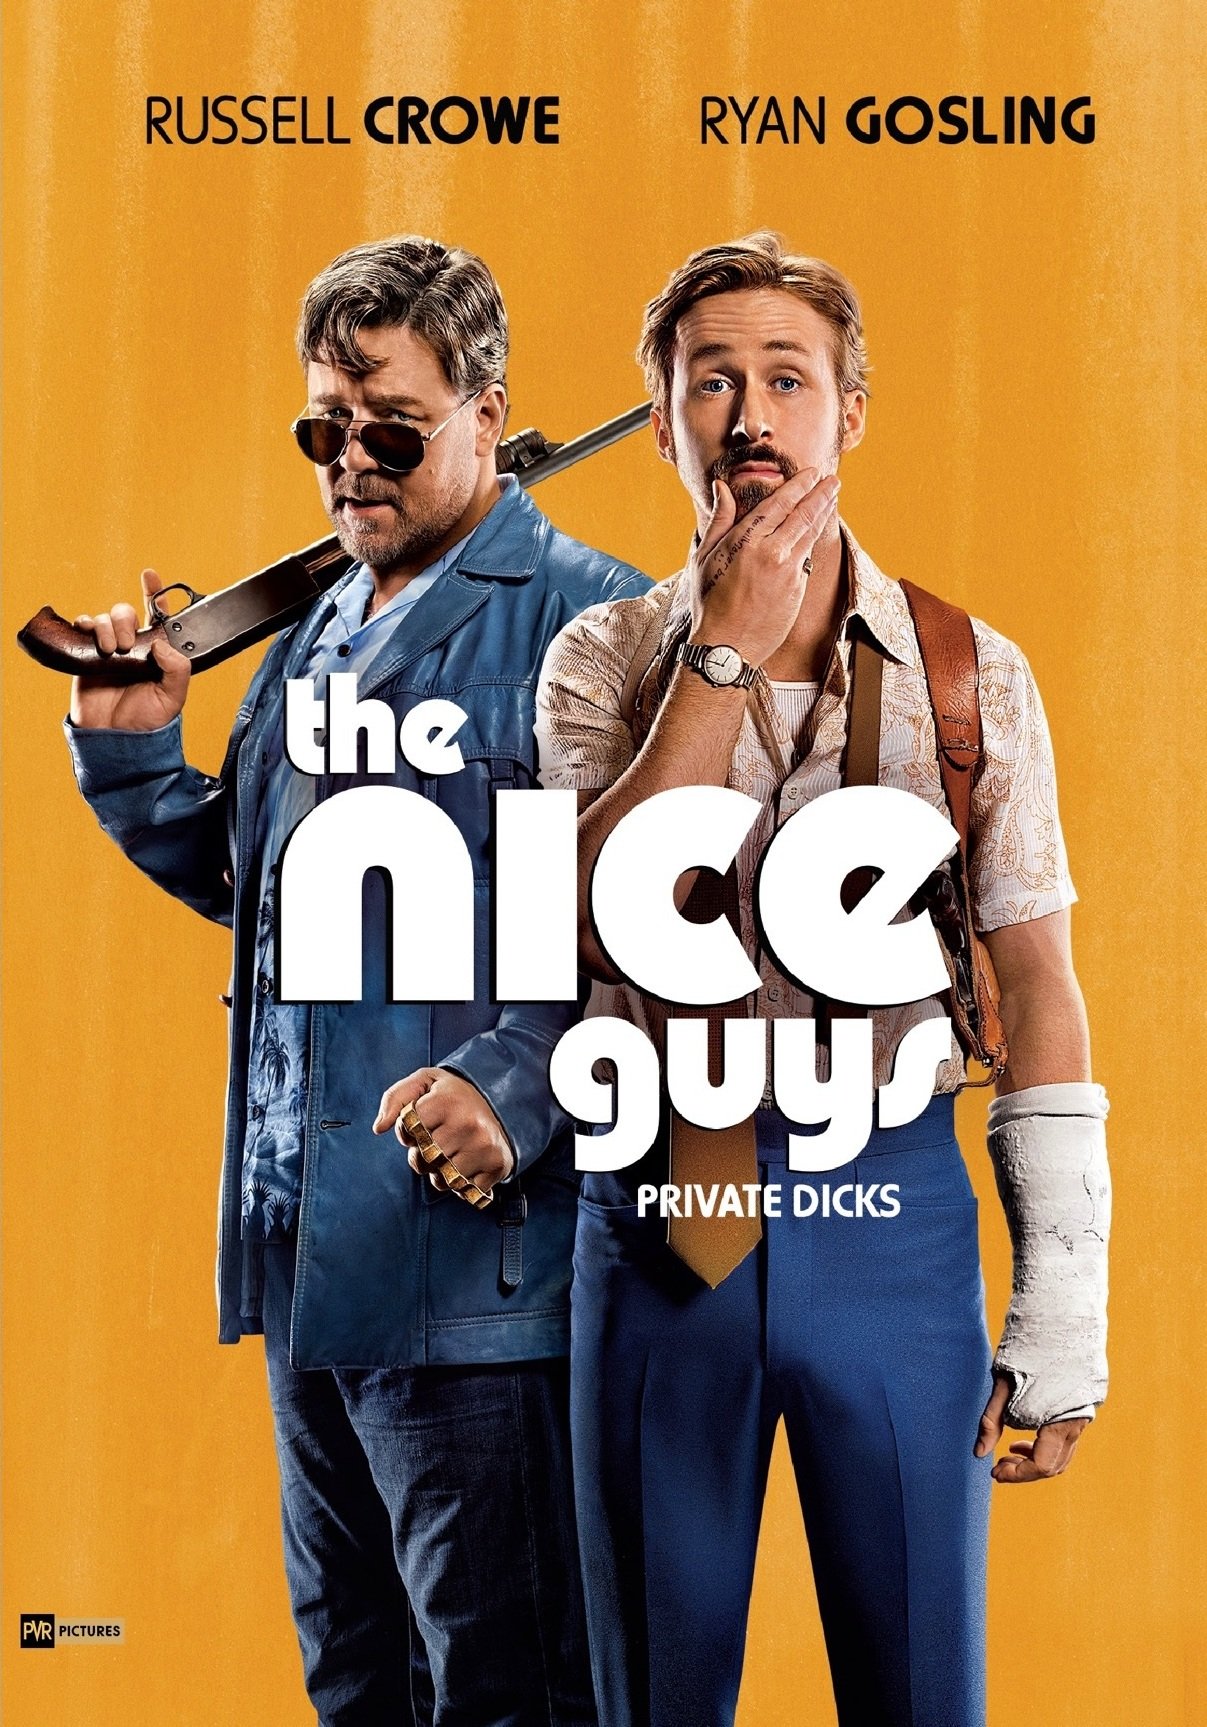 the-nice-guys-movie-purchase-or-watch-online